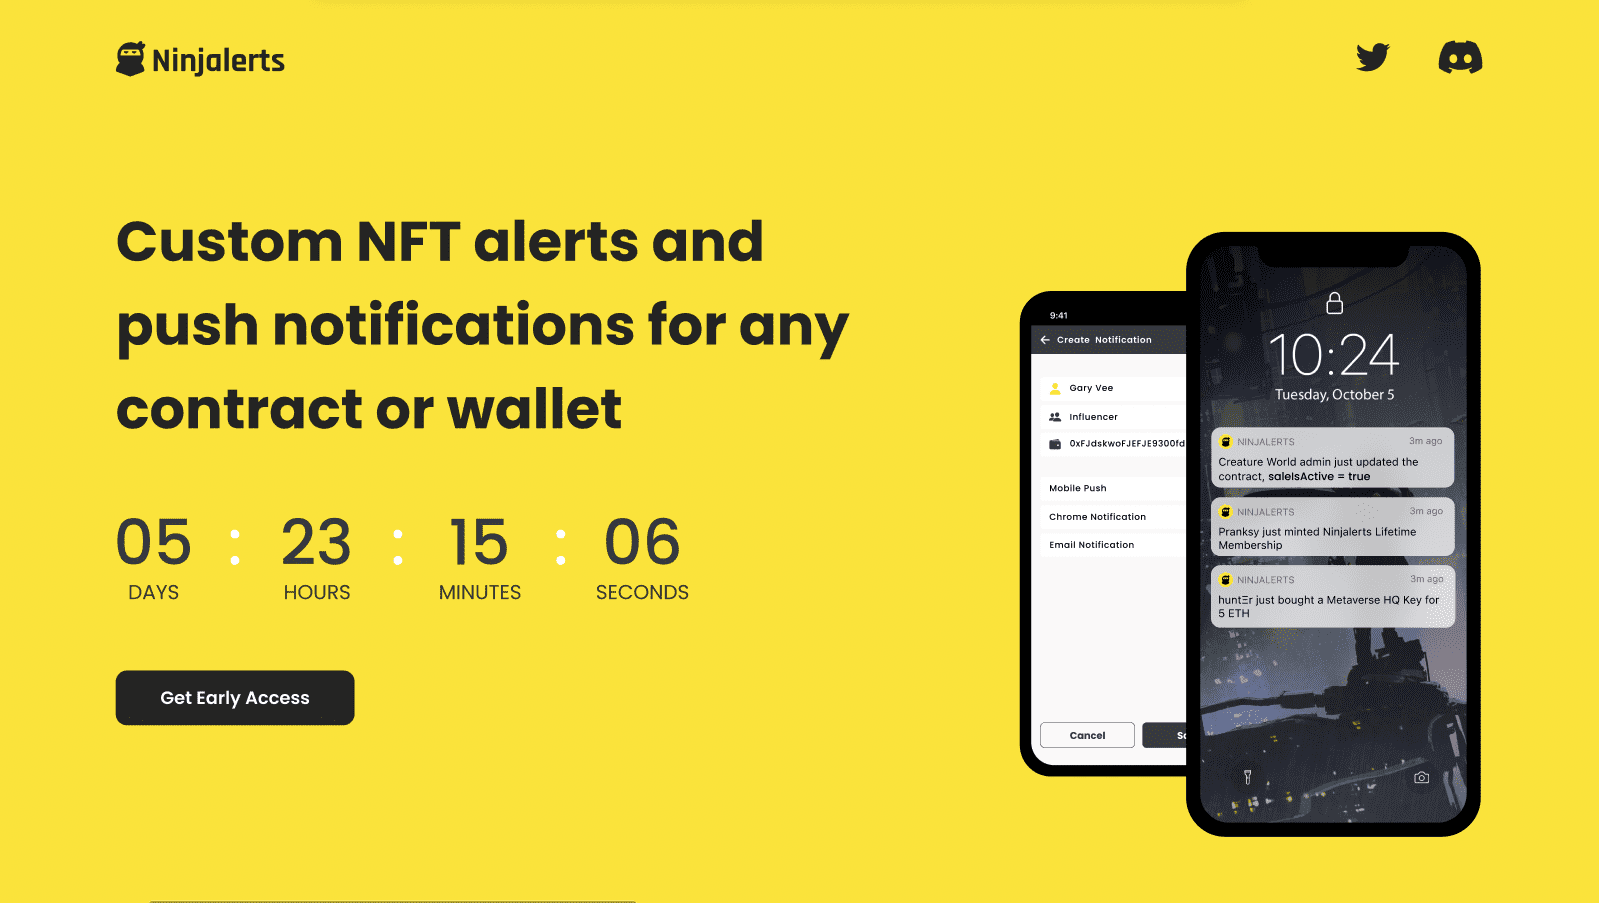 Ninjalerts: NFT Alerts from your phone